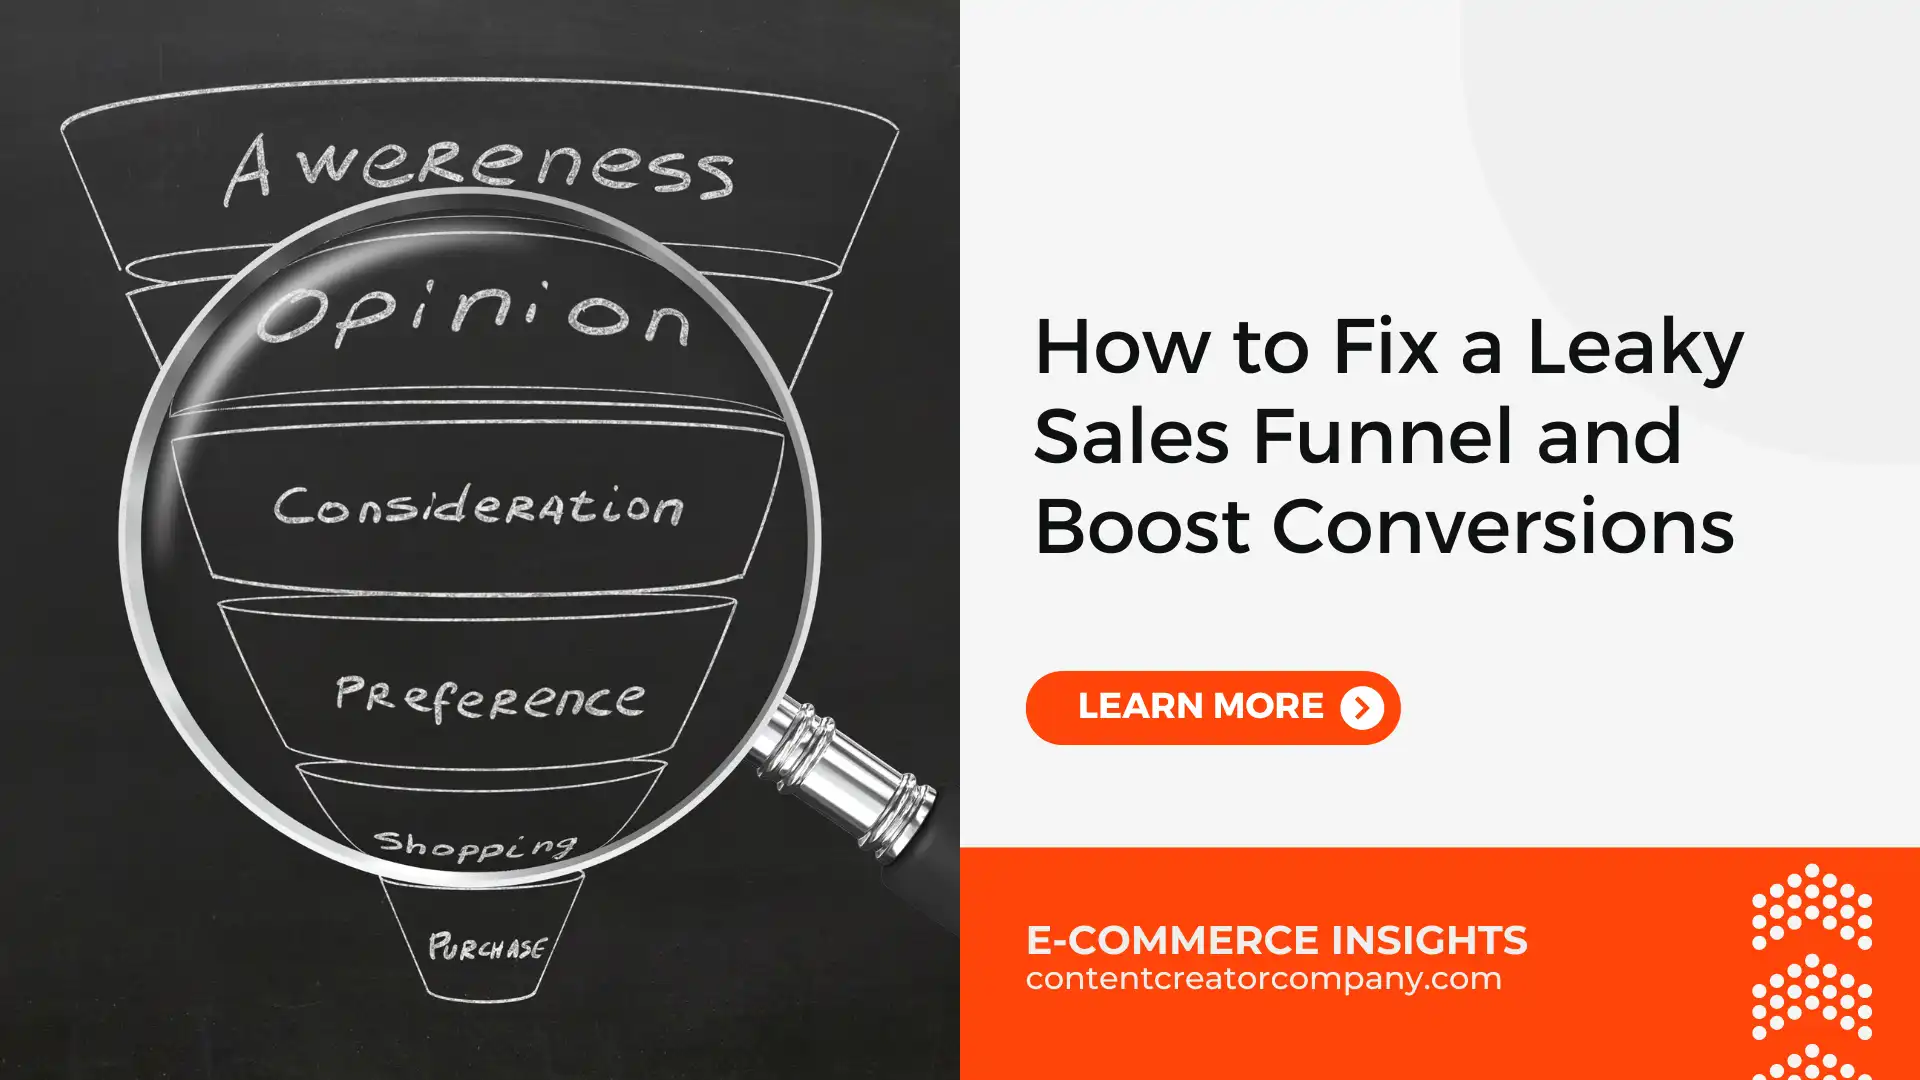 How to Fix a Leaky Sales Funnel and Boost Conversions